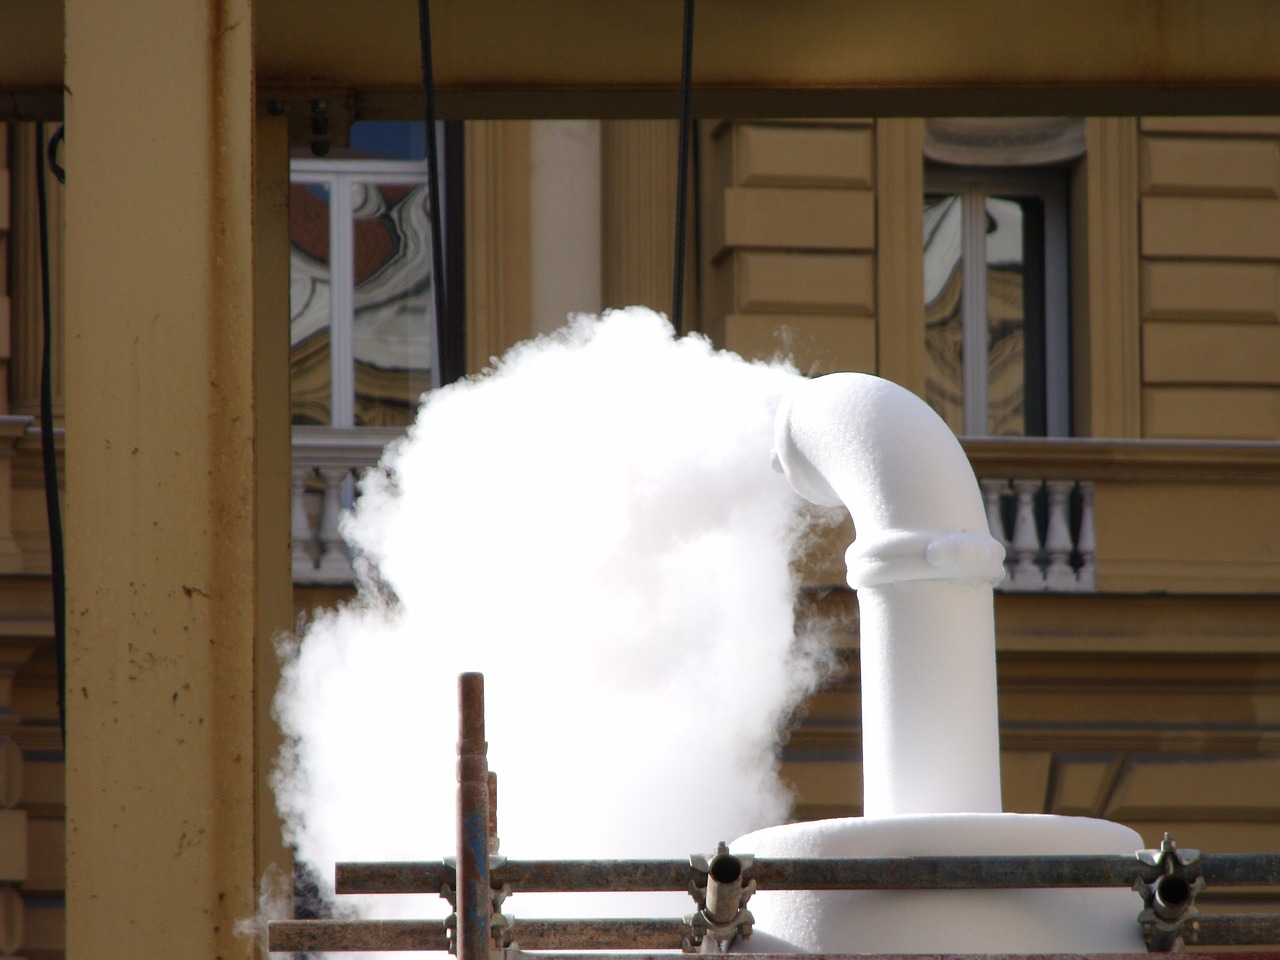 steam venting public works free photo